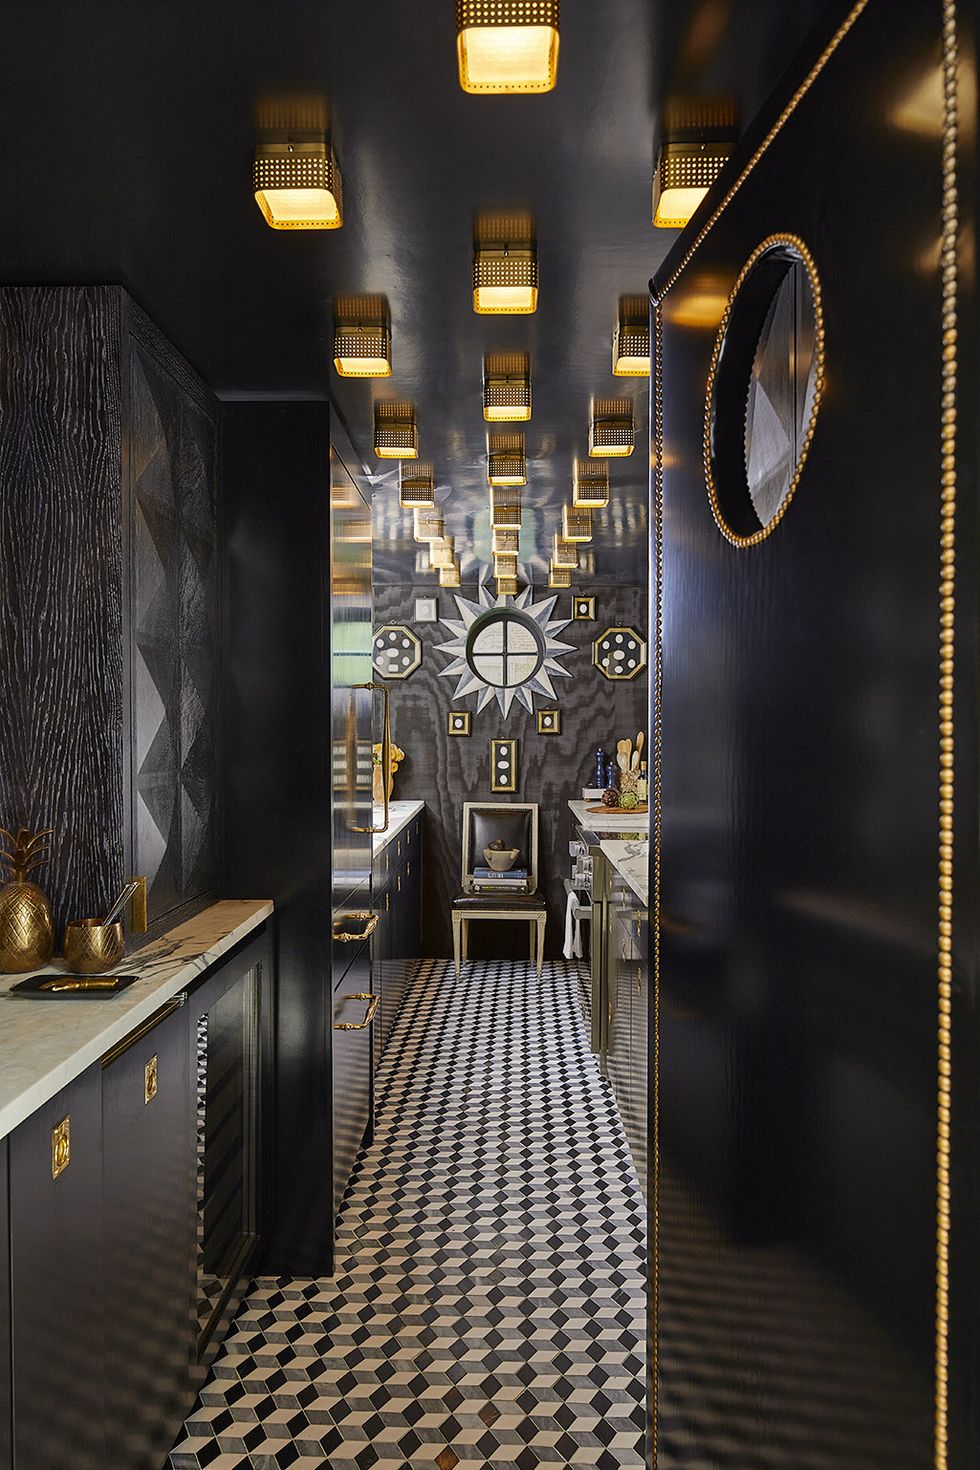 black cabinets, white, black and gray tiles, gold hardware